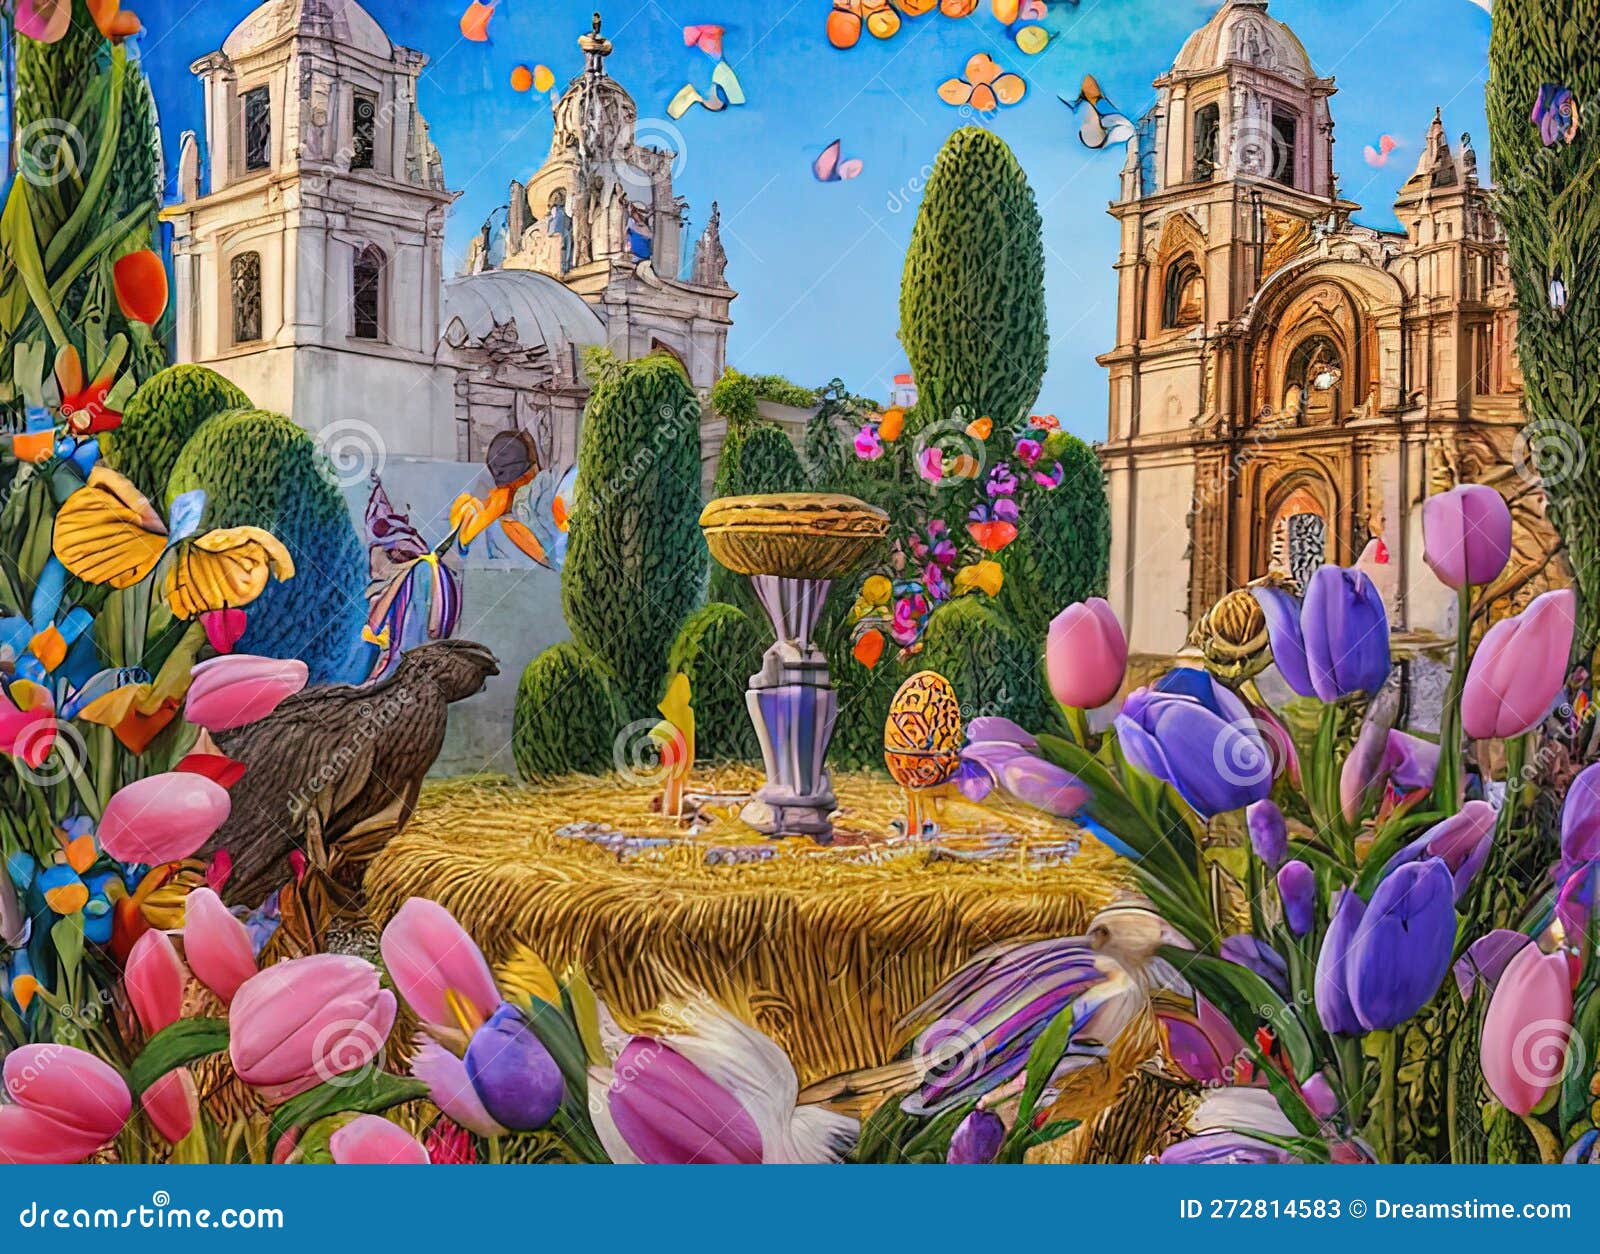 easter holiday scene in toluca,mÃ©xico,mexico.